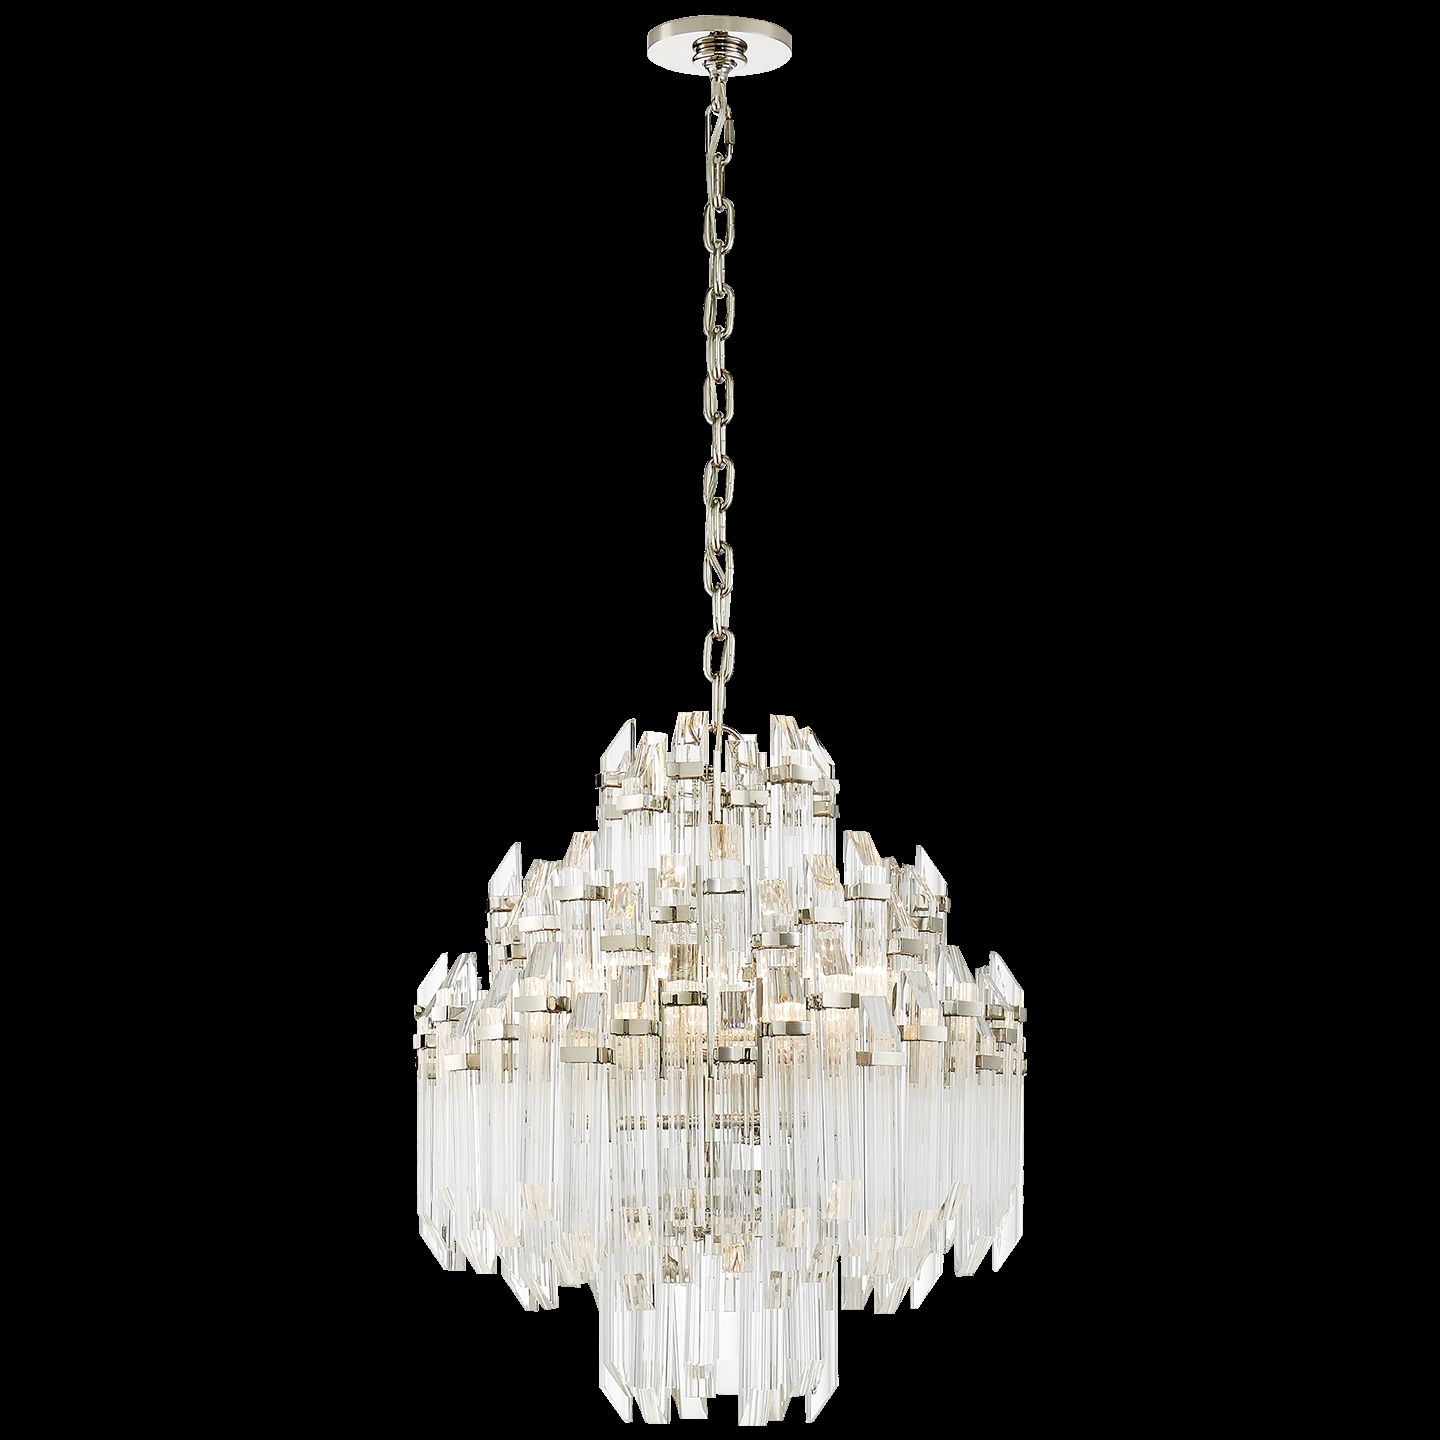 Signature Designer Crystal Chandelier Circa Lighting With Acrylic Chandelier Lighting (View 10 of 25)